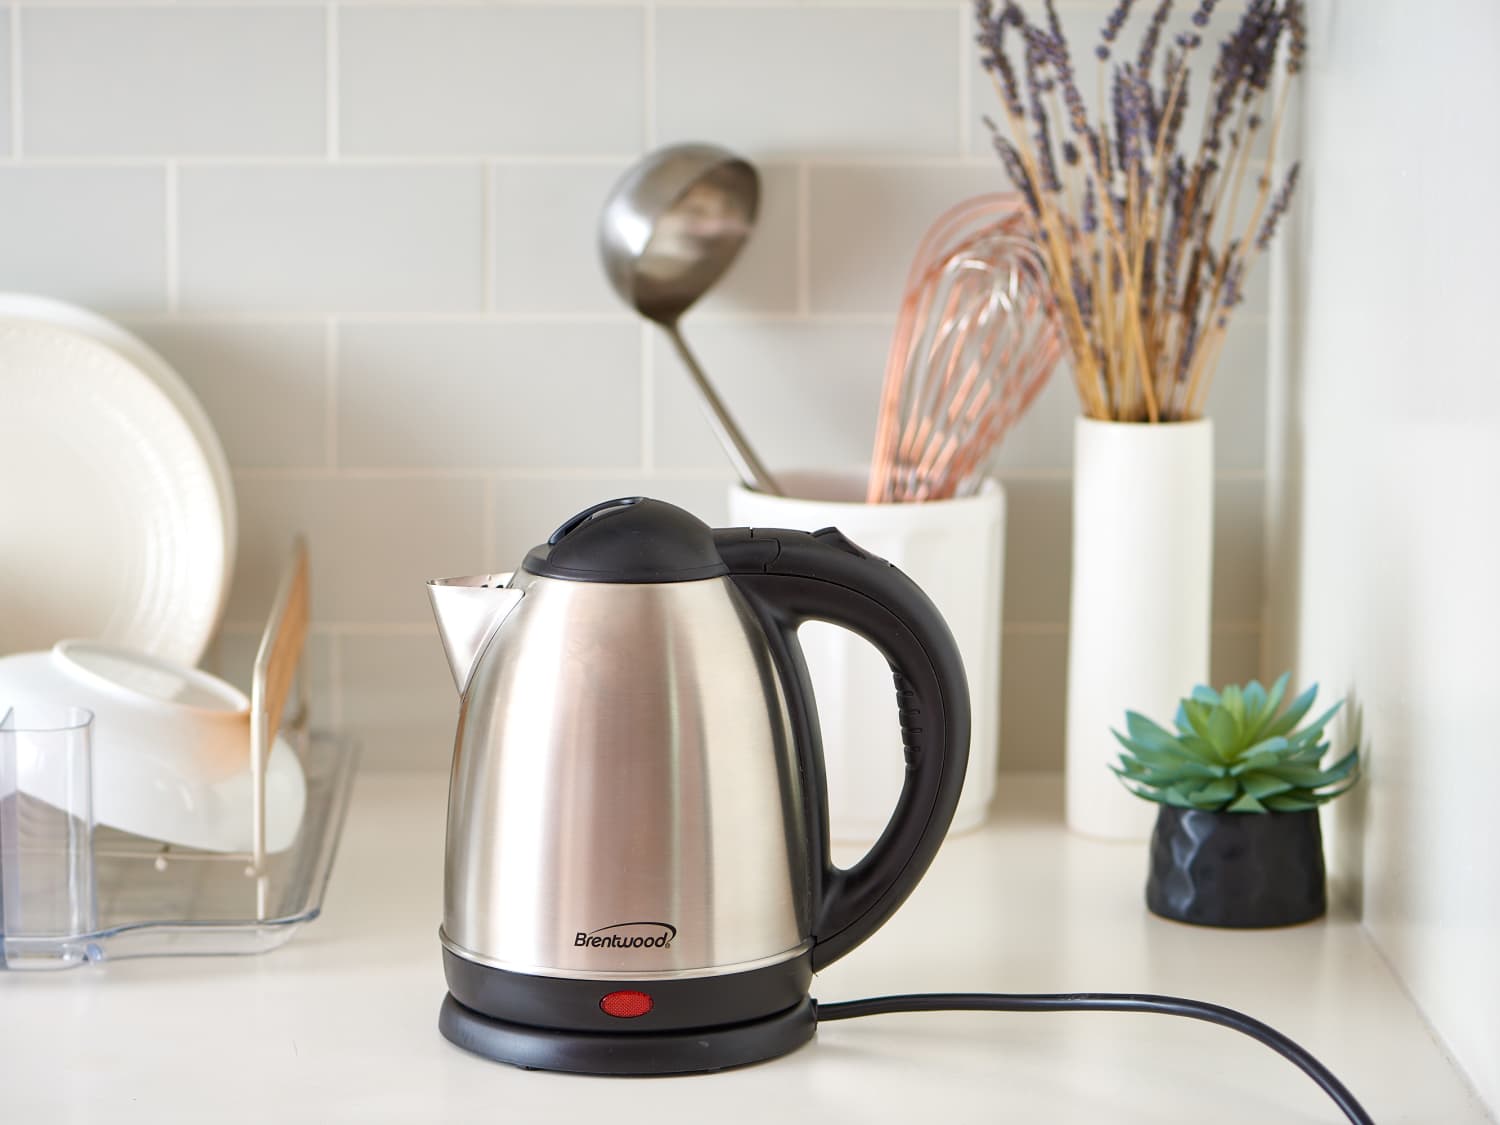 koel Formulering Dij How To Clean an Electric Kettle | Kitchn